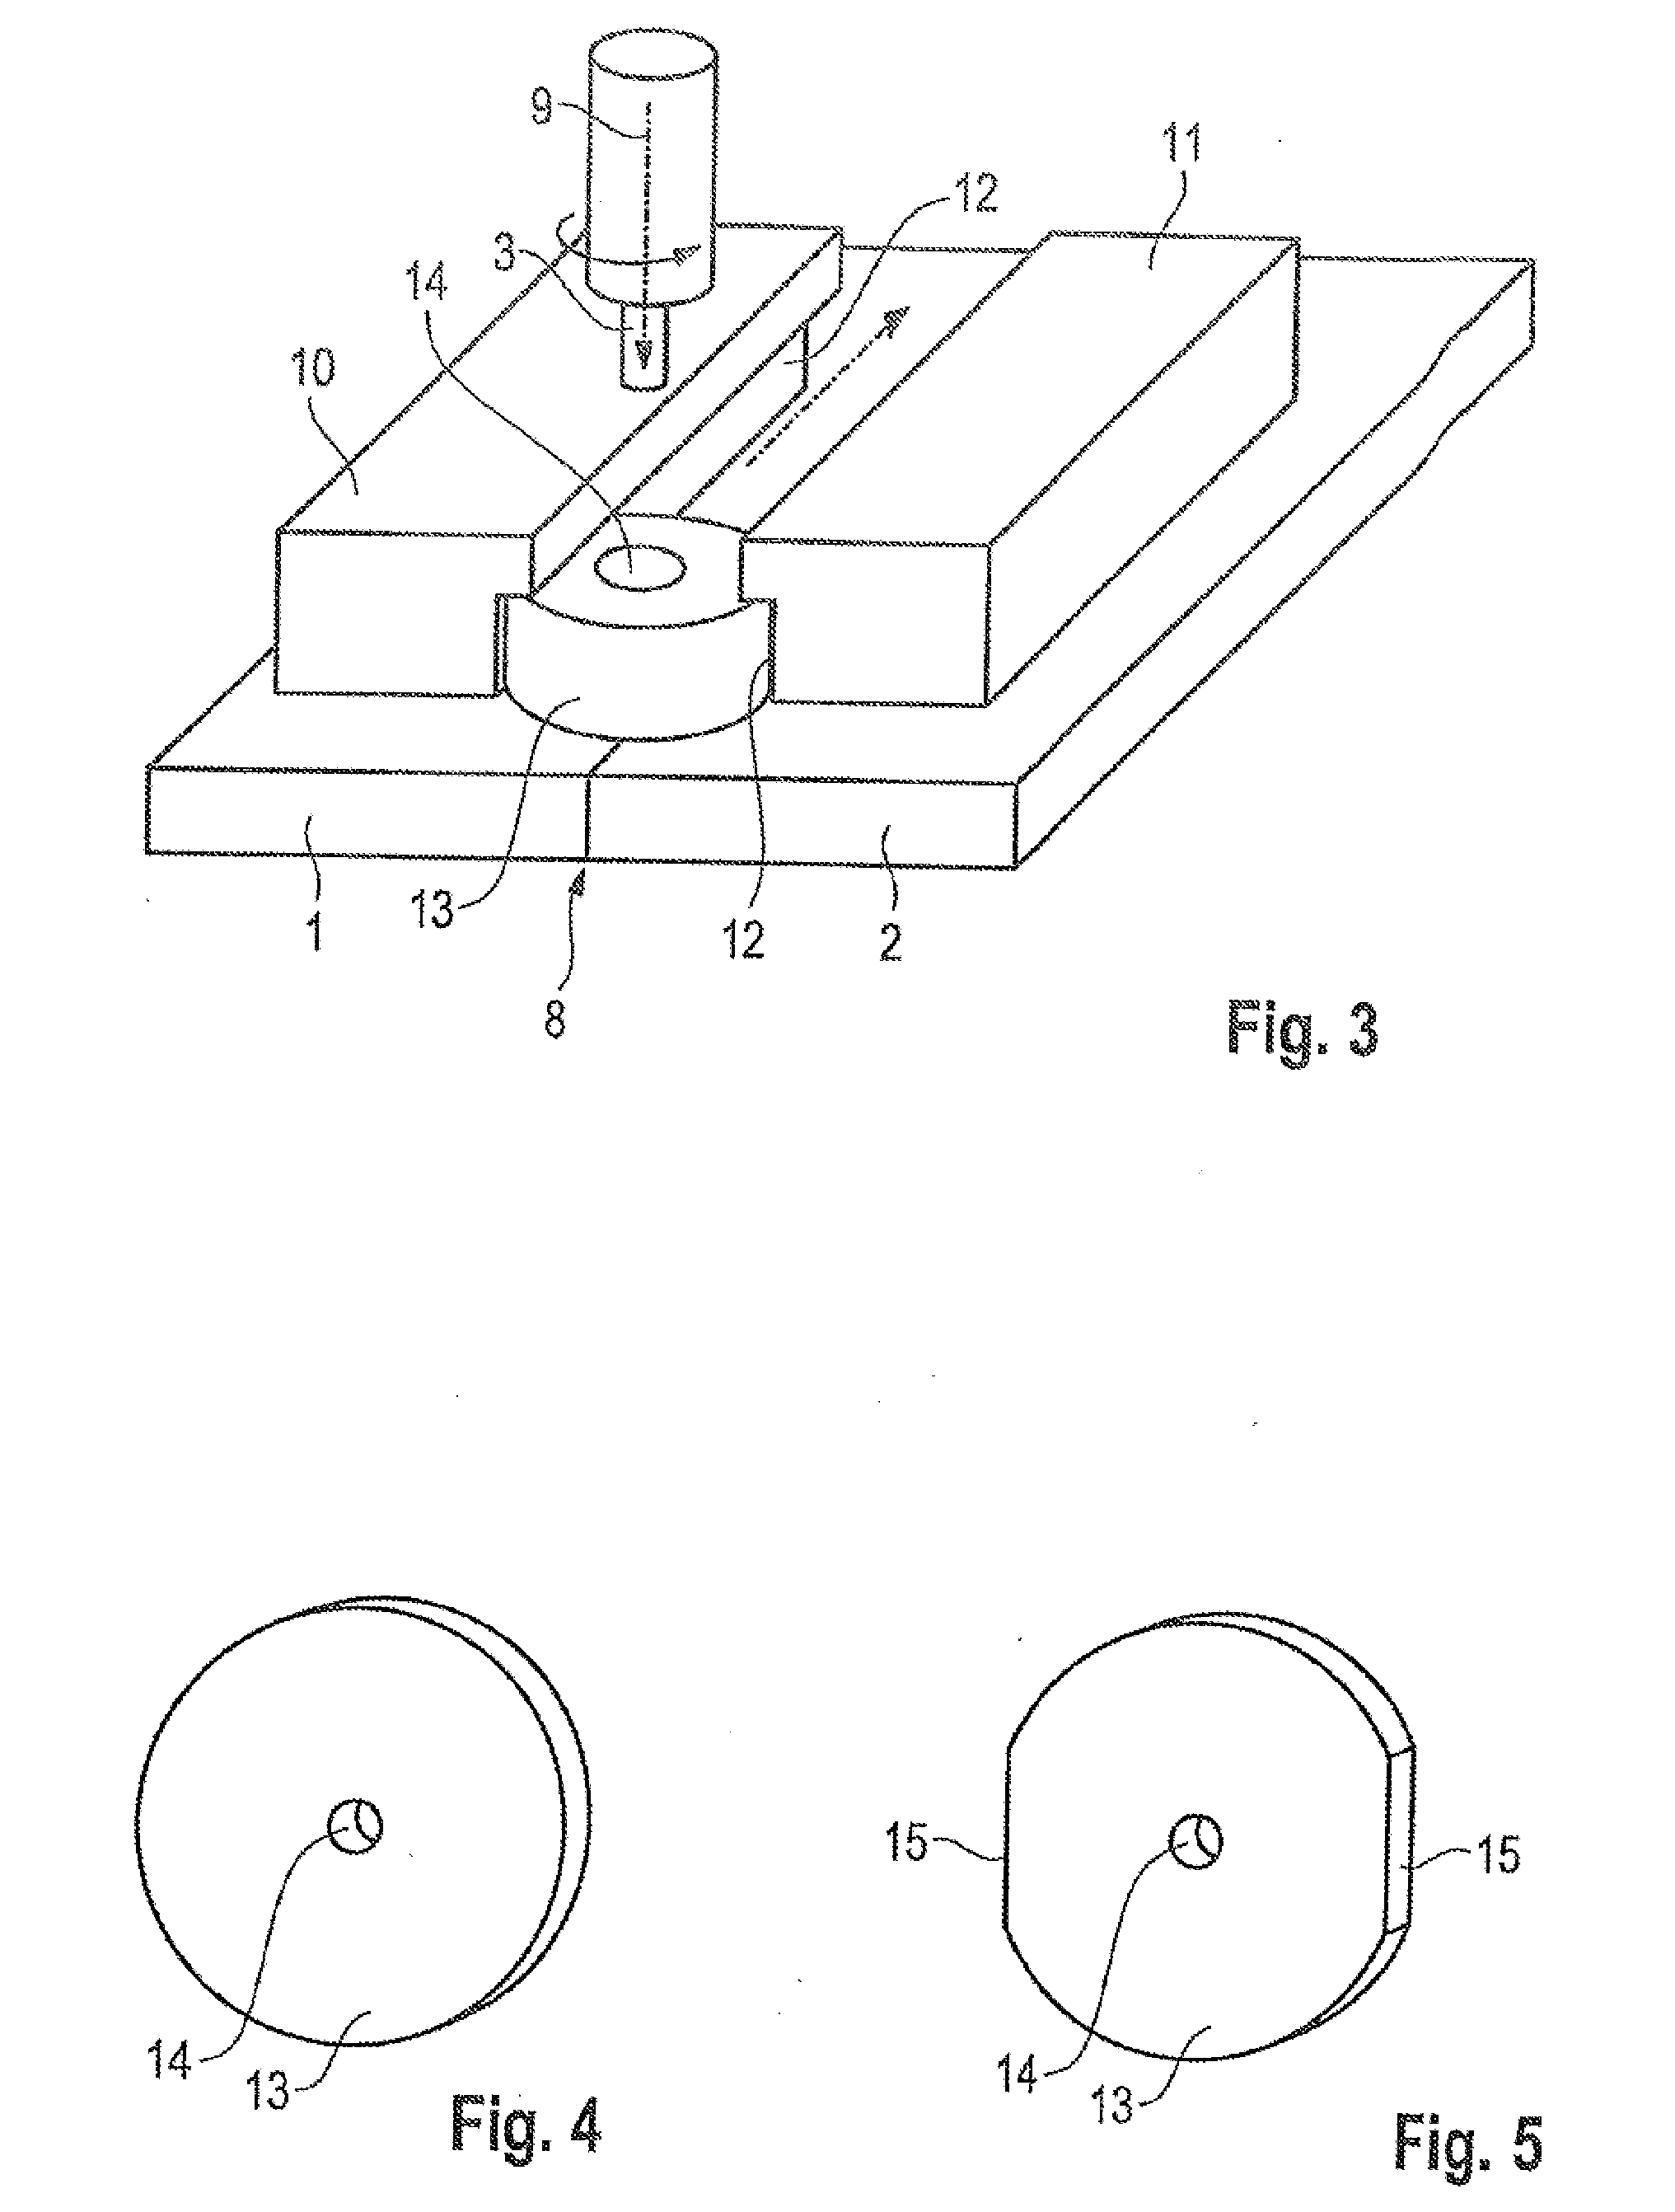 Friction stir welding apparatus and method for joining workpieces by means of a friction stir welding process